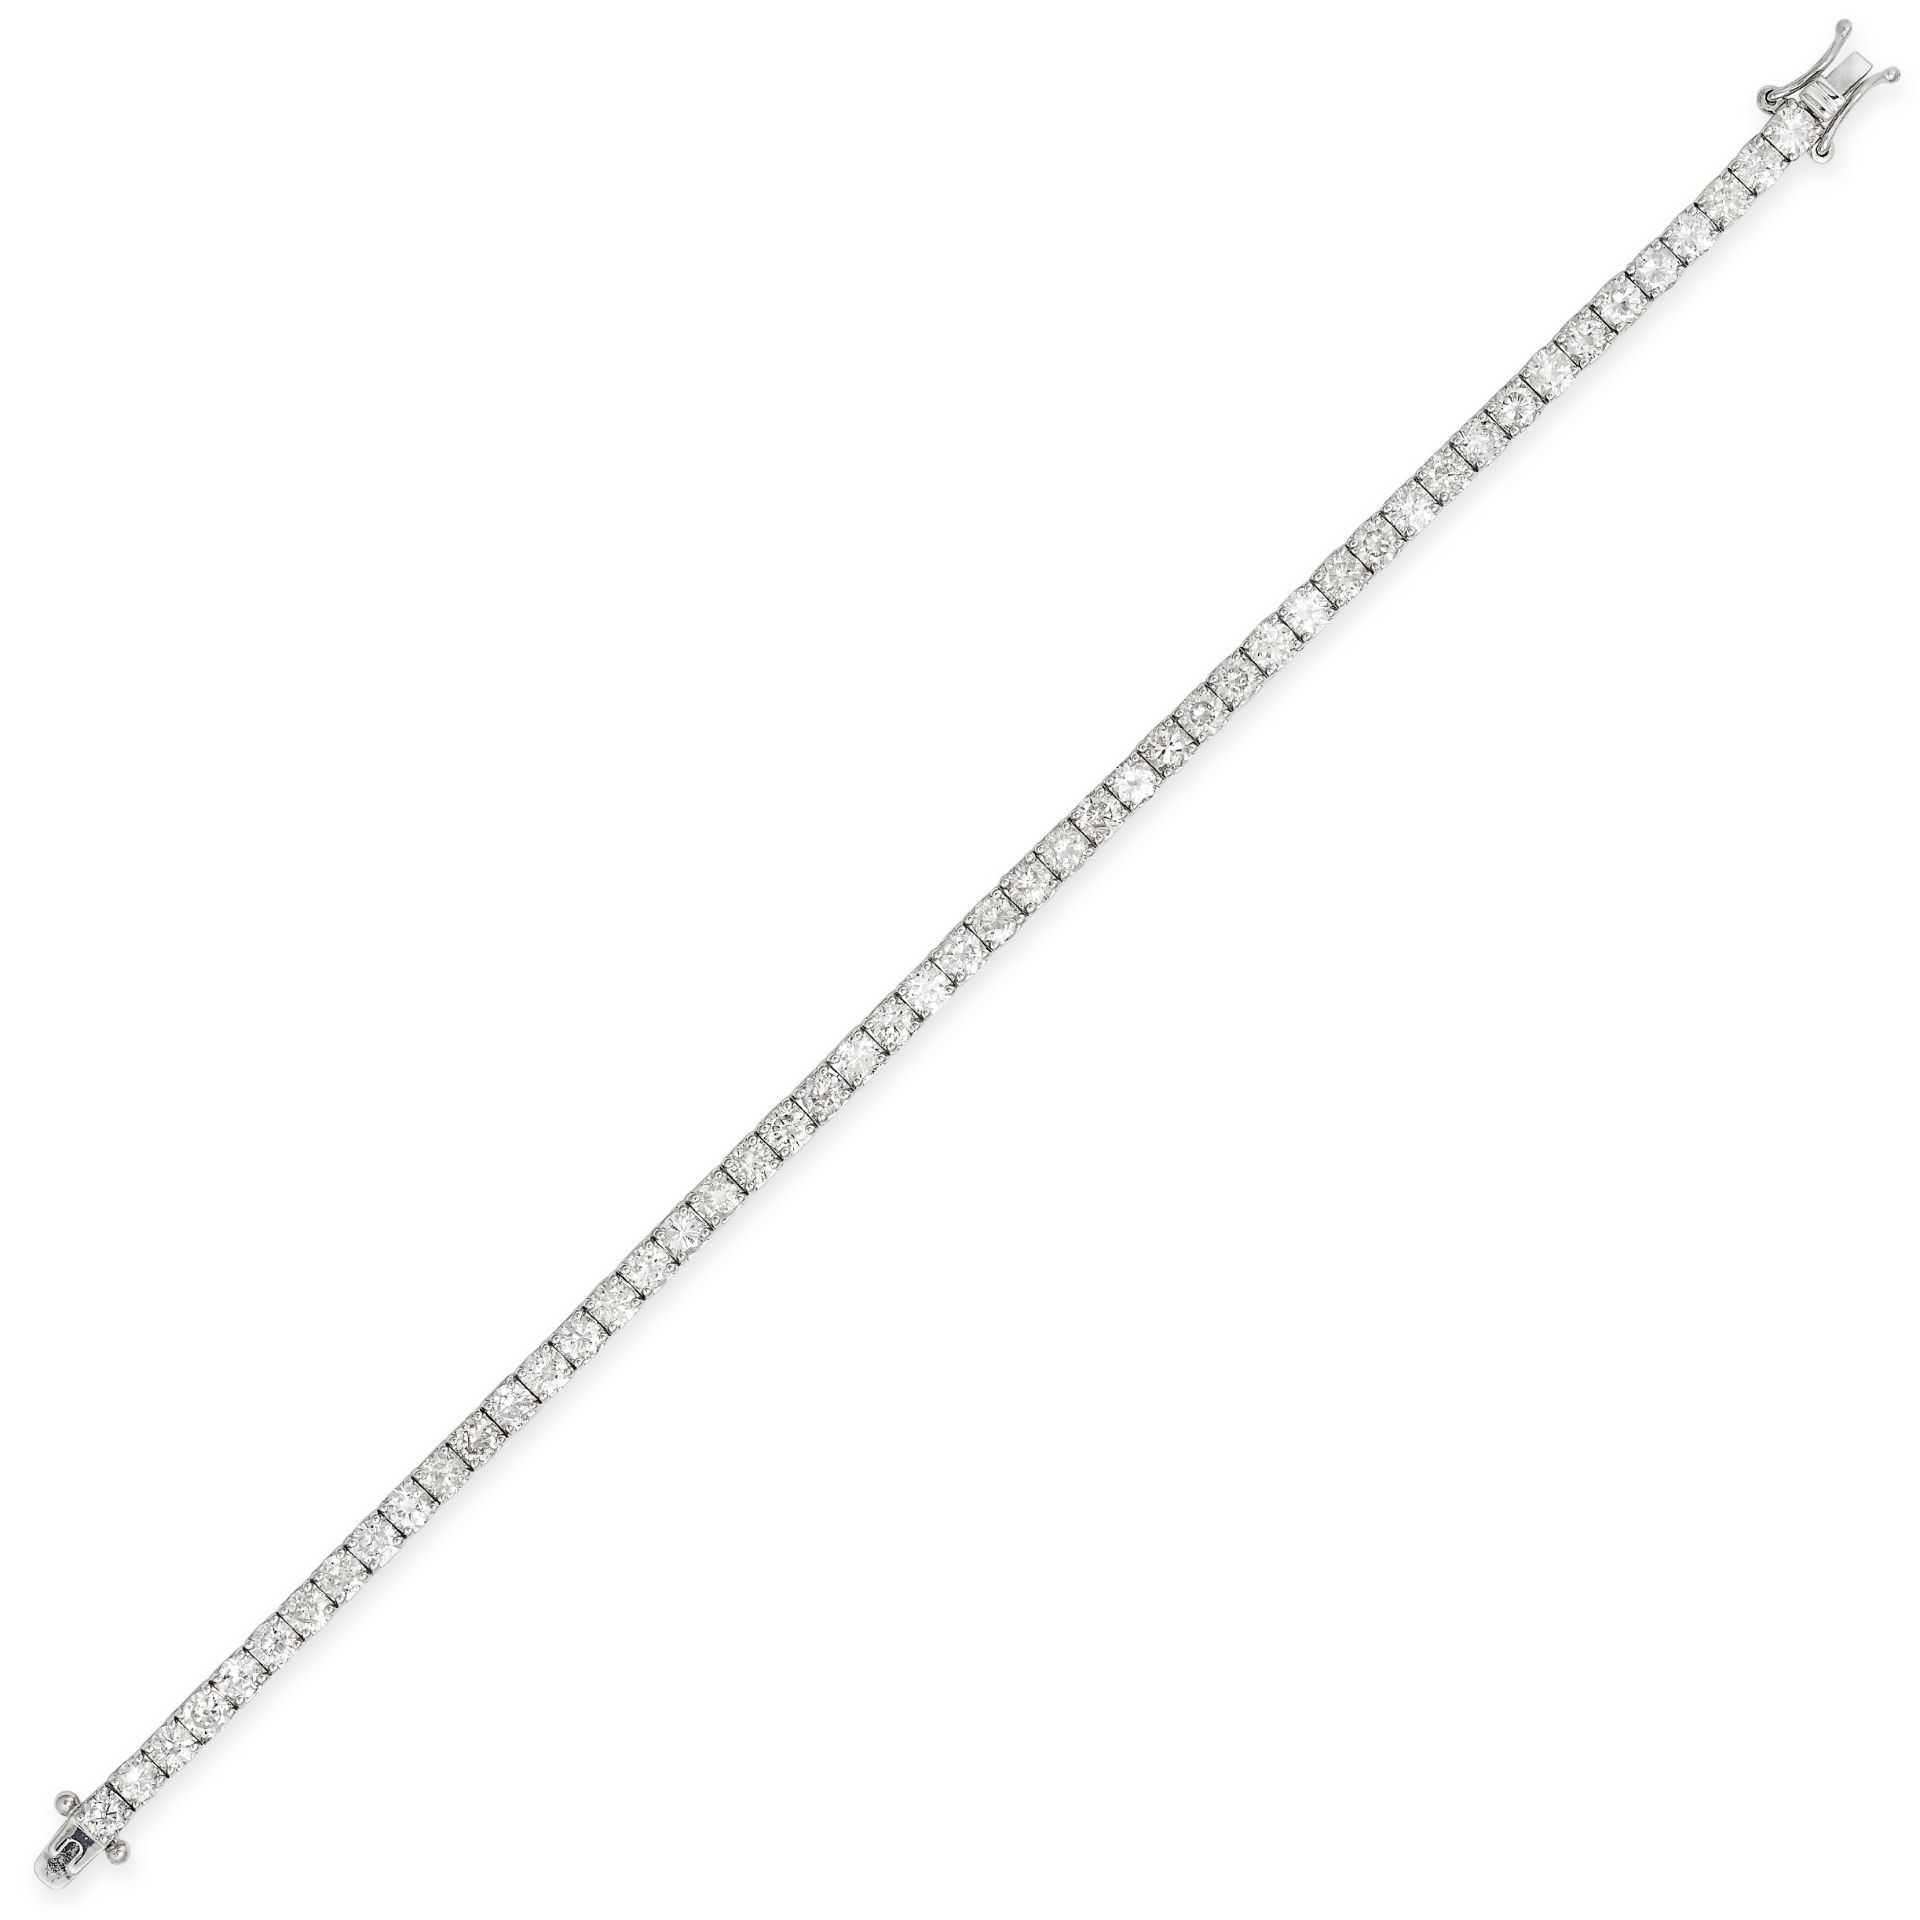 A 6.80 CARAT DIAMOND LINE BRACELET in 18ct white gold, set with a row of round brilliant cut diam...